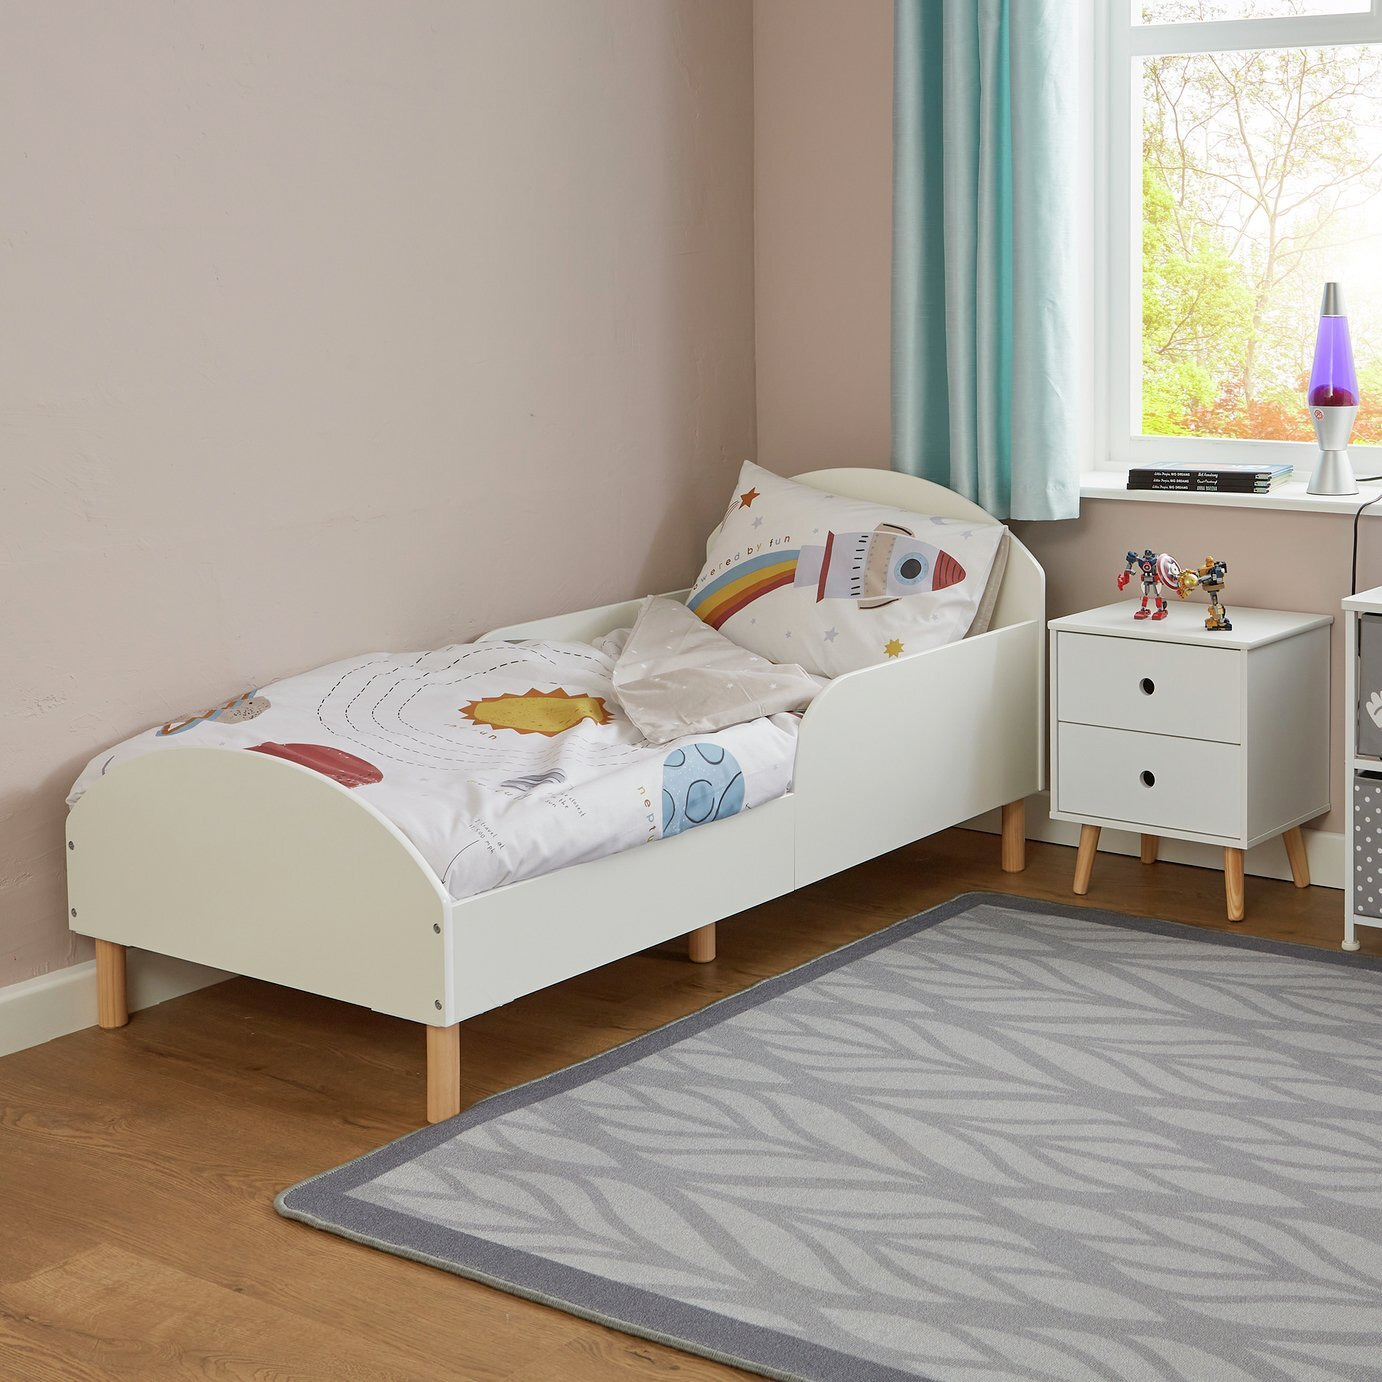 Liberty House Toddler Bed - White - image 1